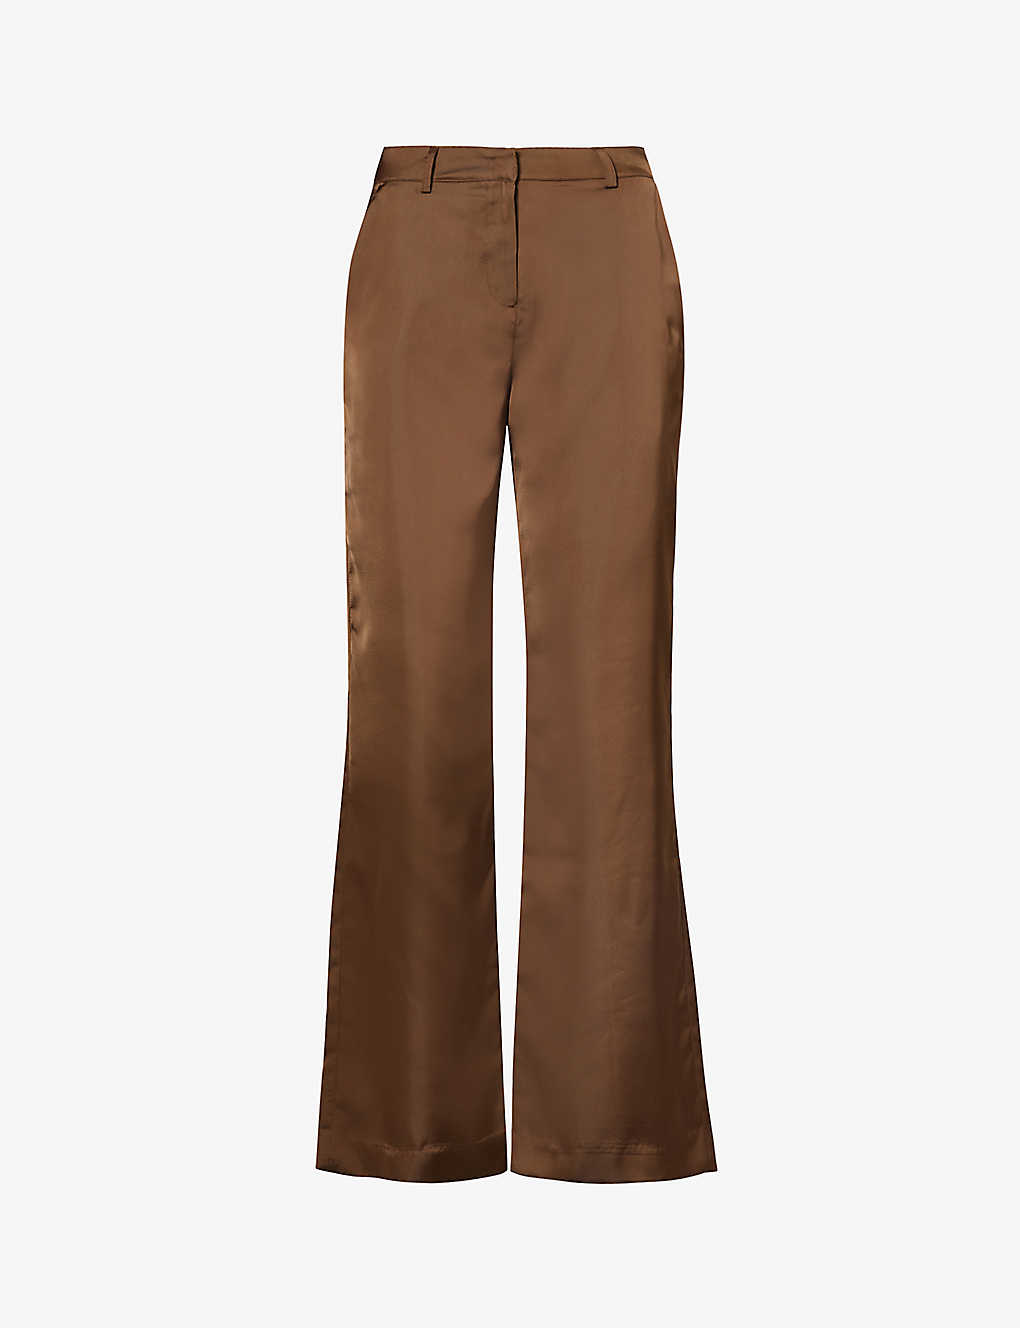 The Frankie Shop Frankie Shop Womens Brown Kit Flared-leg Mid-rise Satin Trousers